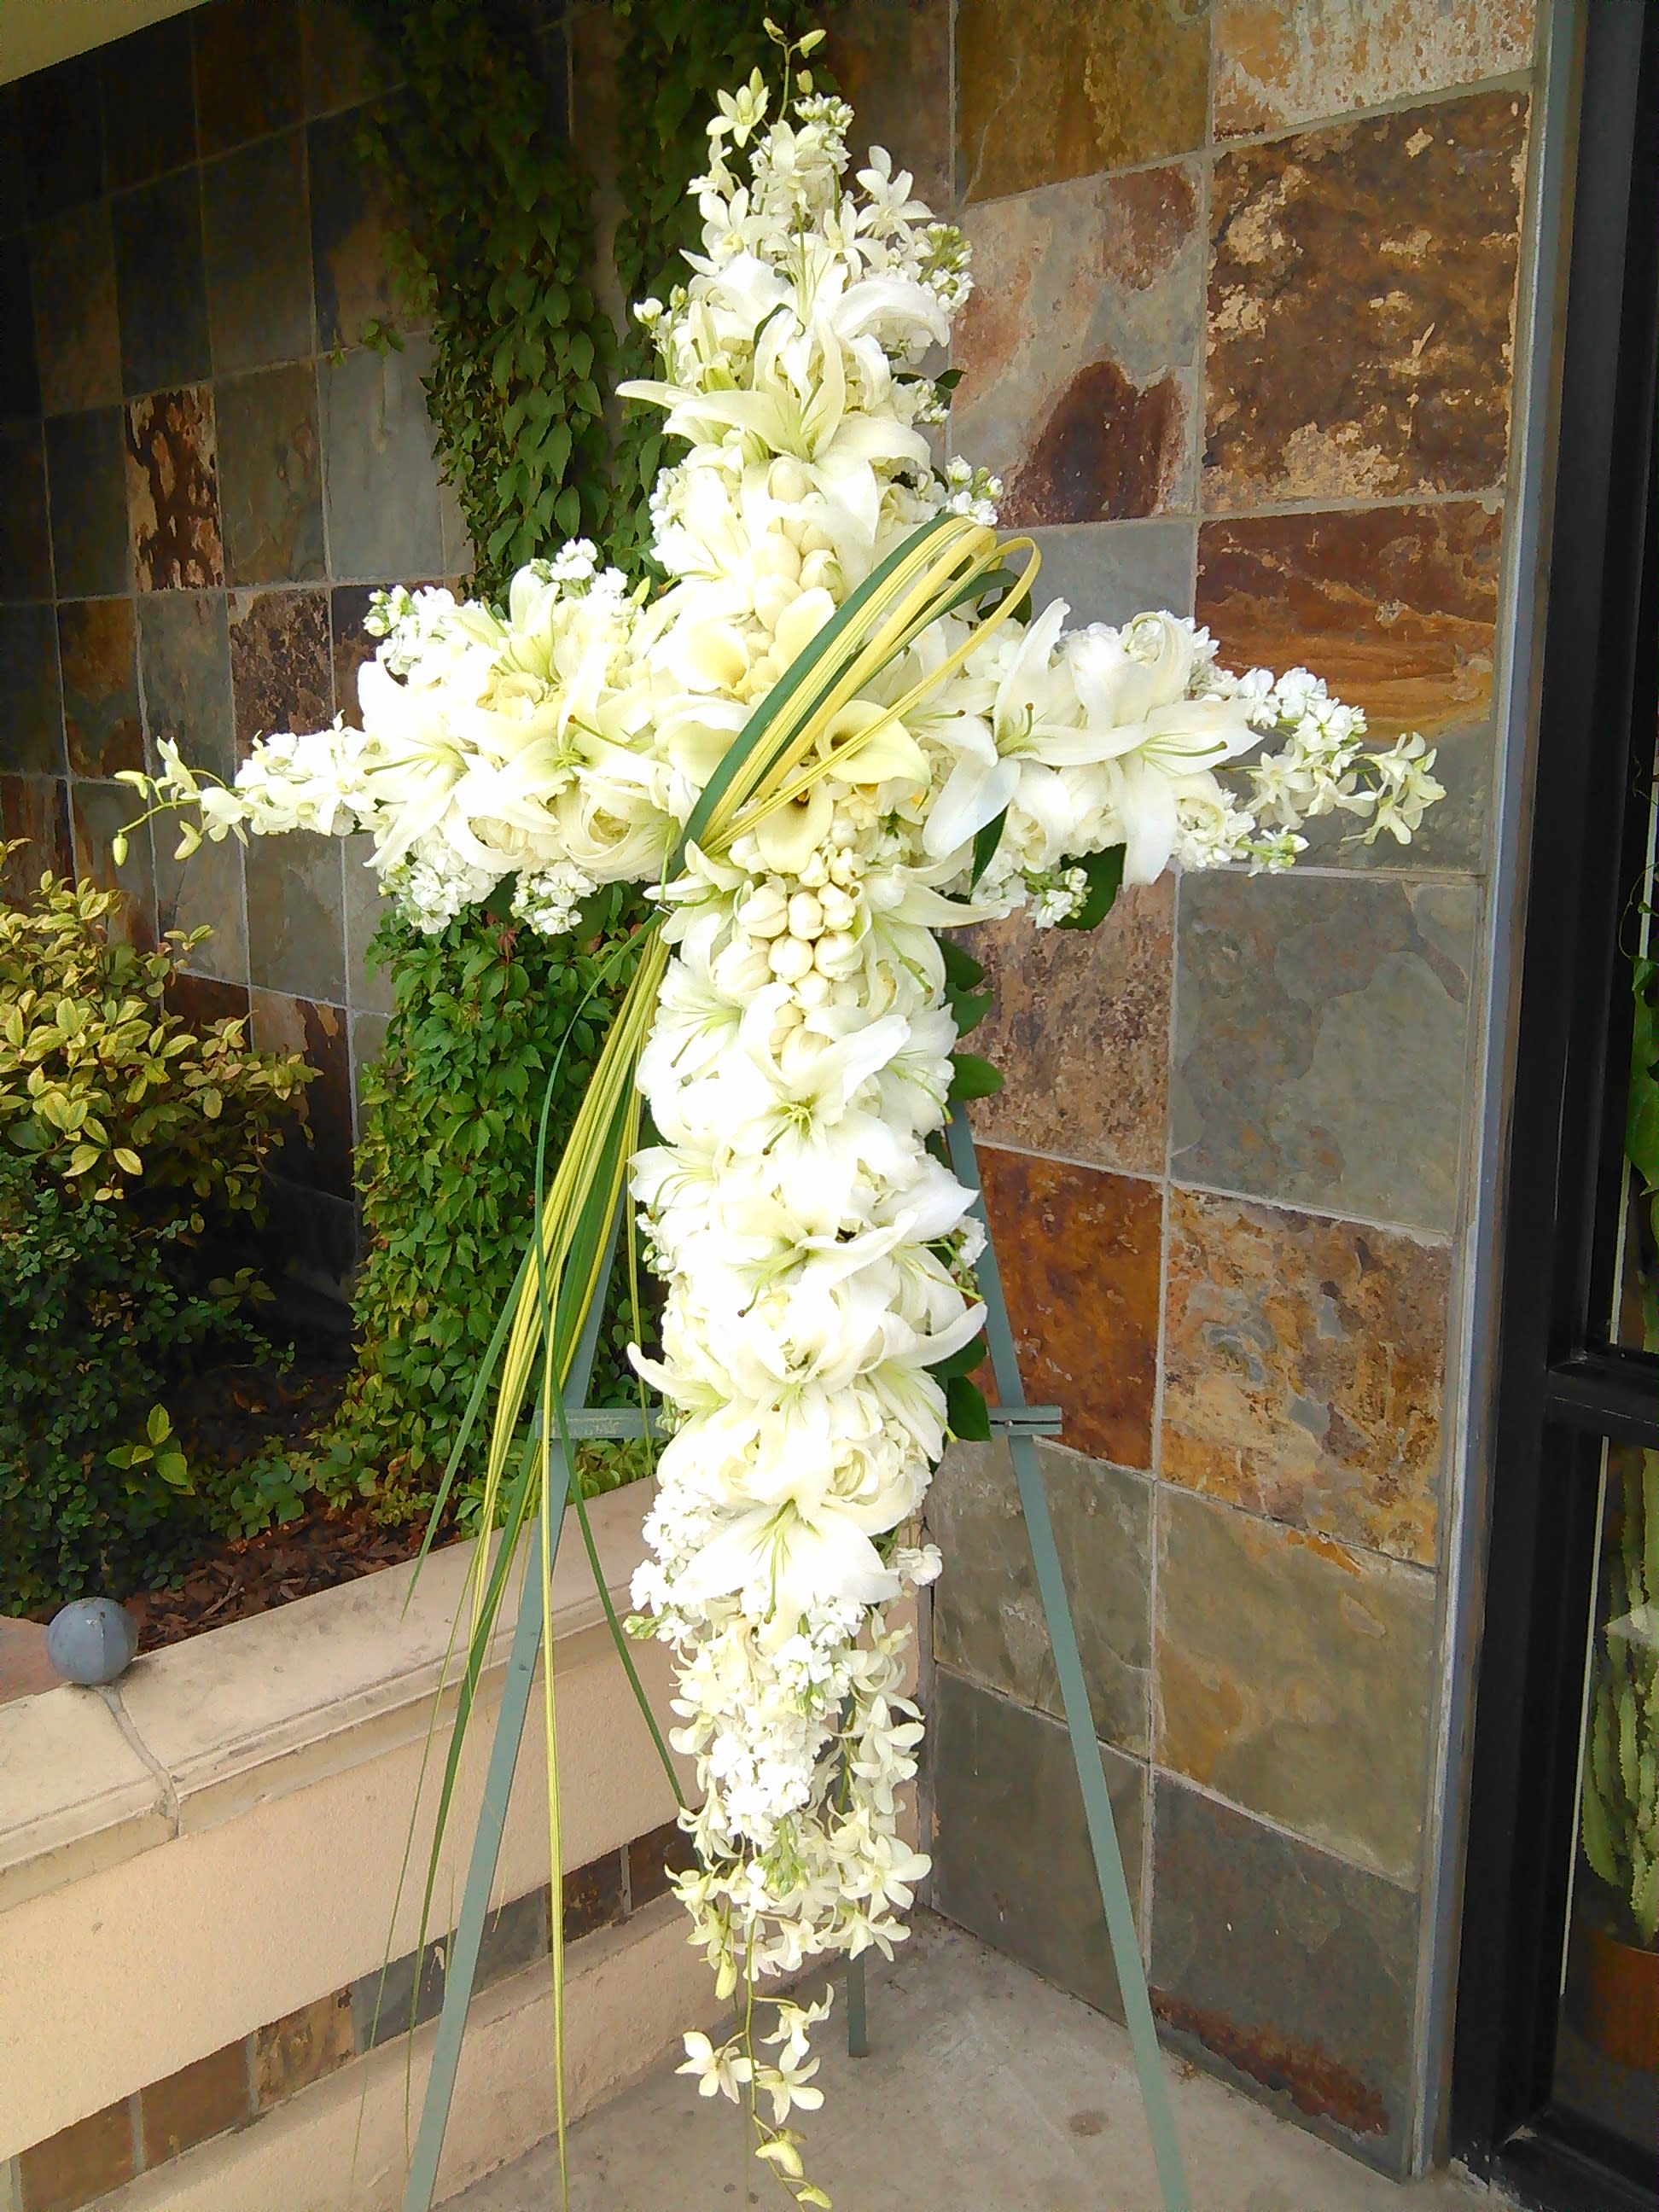 Ethereal Grace - Mixed arrangement of white lilies, tulips, orchids, calla lilies and stock. Can be created in a variety of colors. Please specify color requests in the special instructions box.